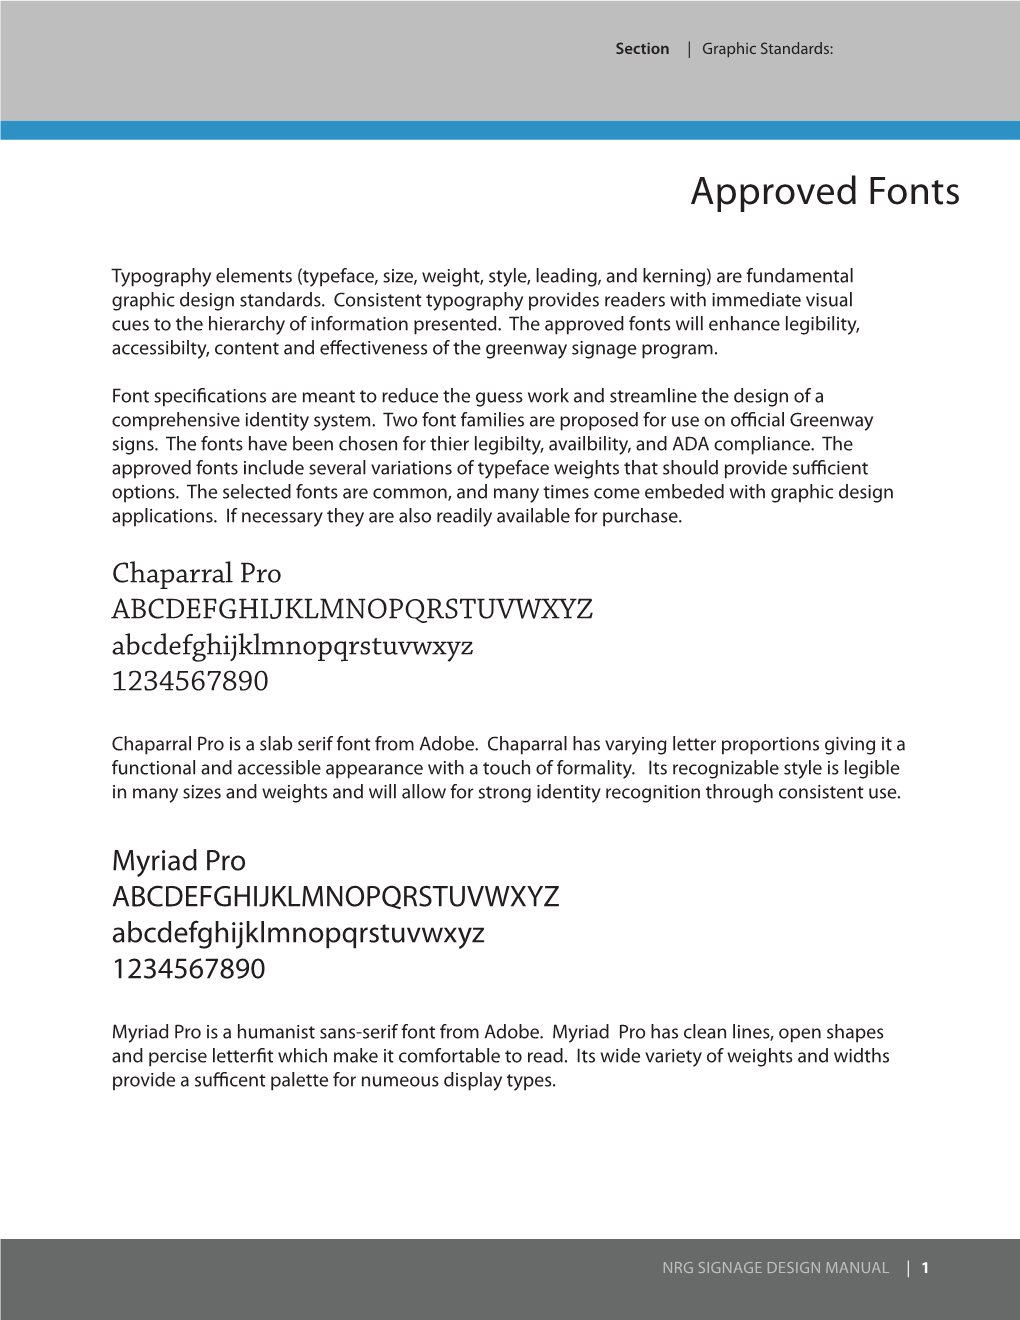 Approved Fonts